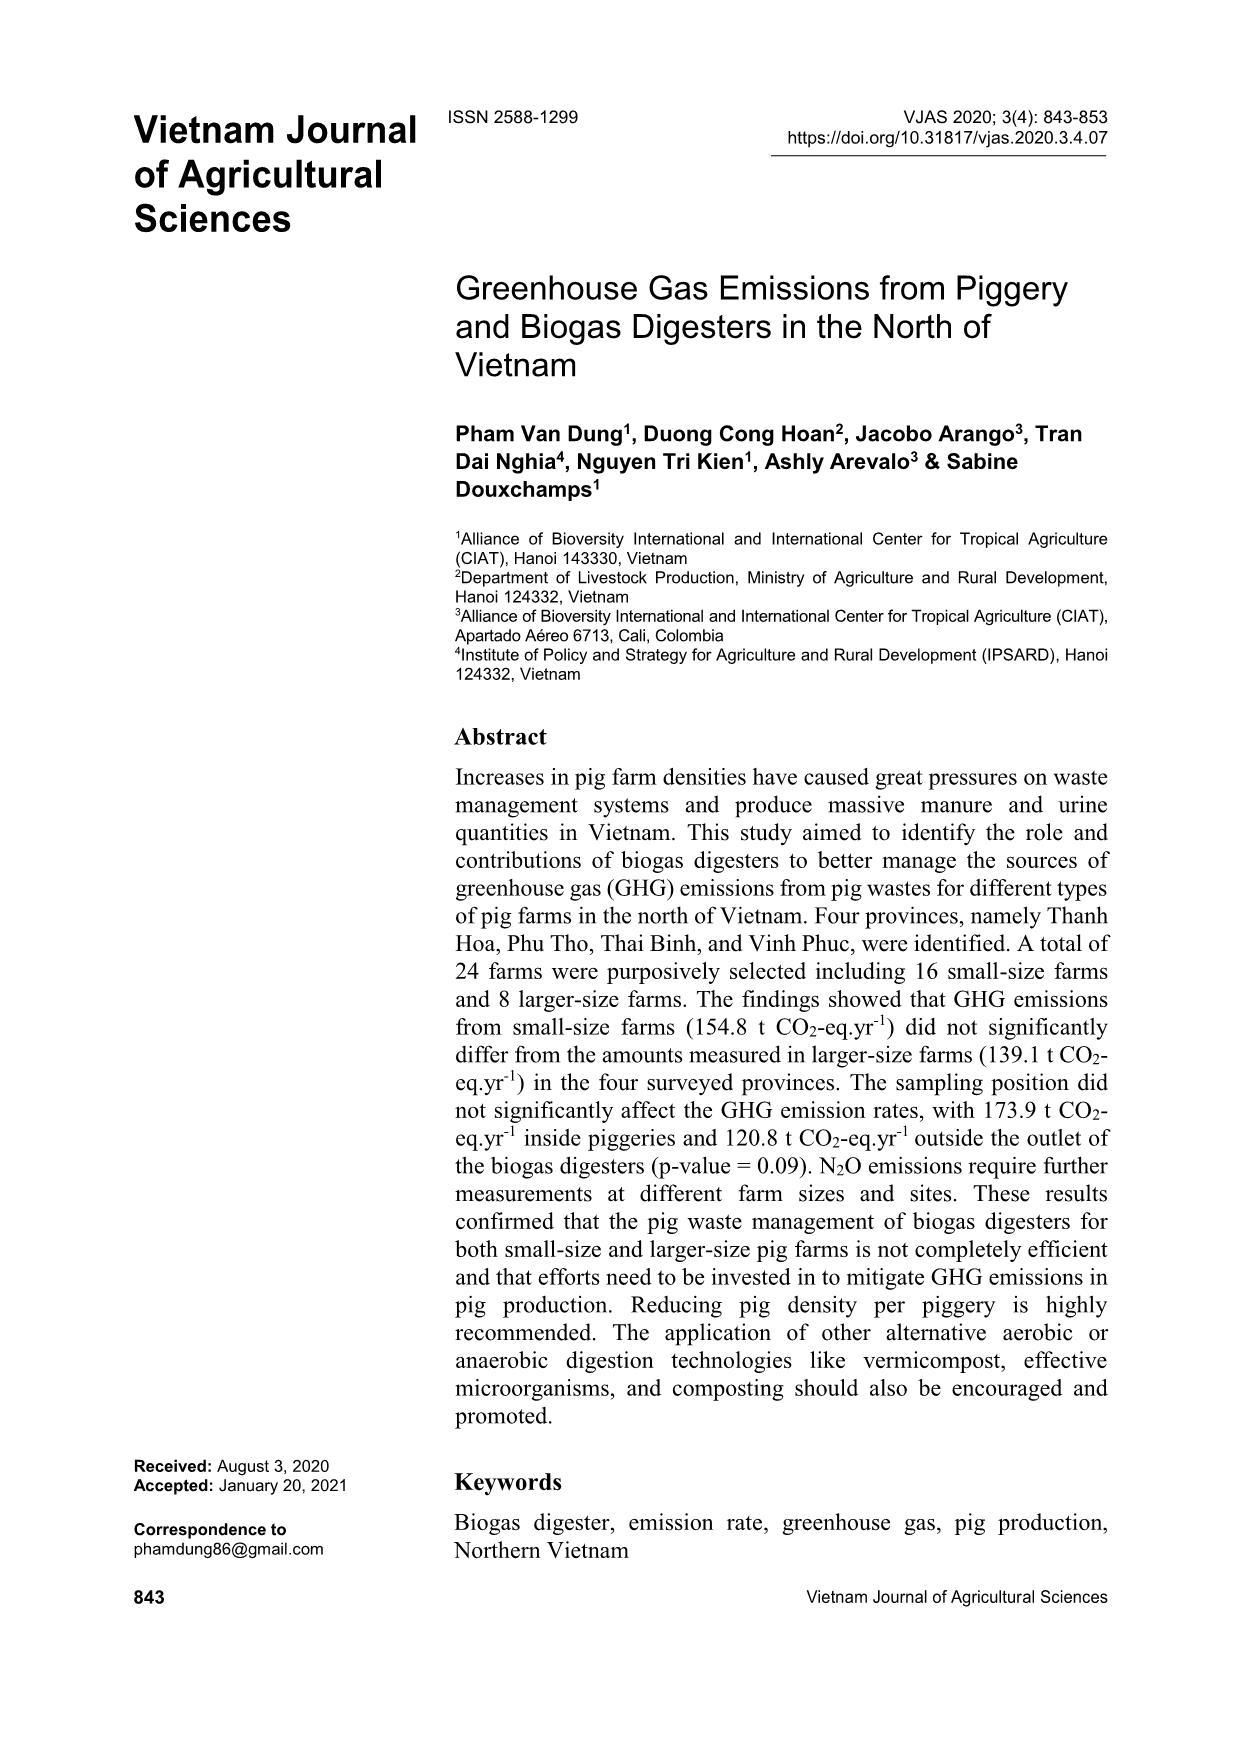 Greenhouse gas emissions from piggery and biogas digesters in the north of Viet Nam trang 1